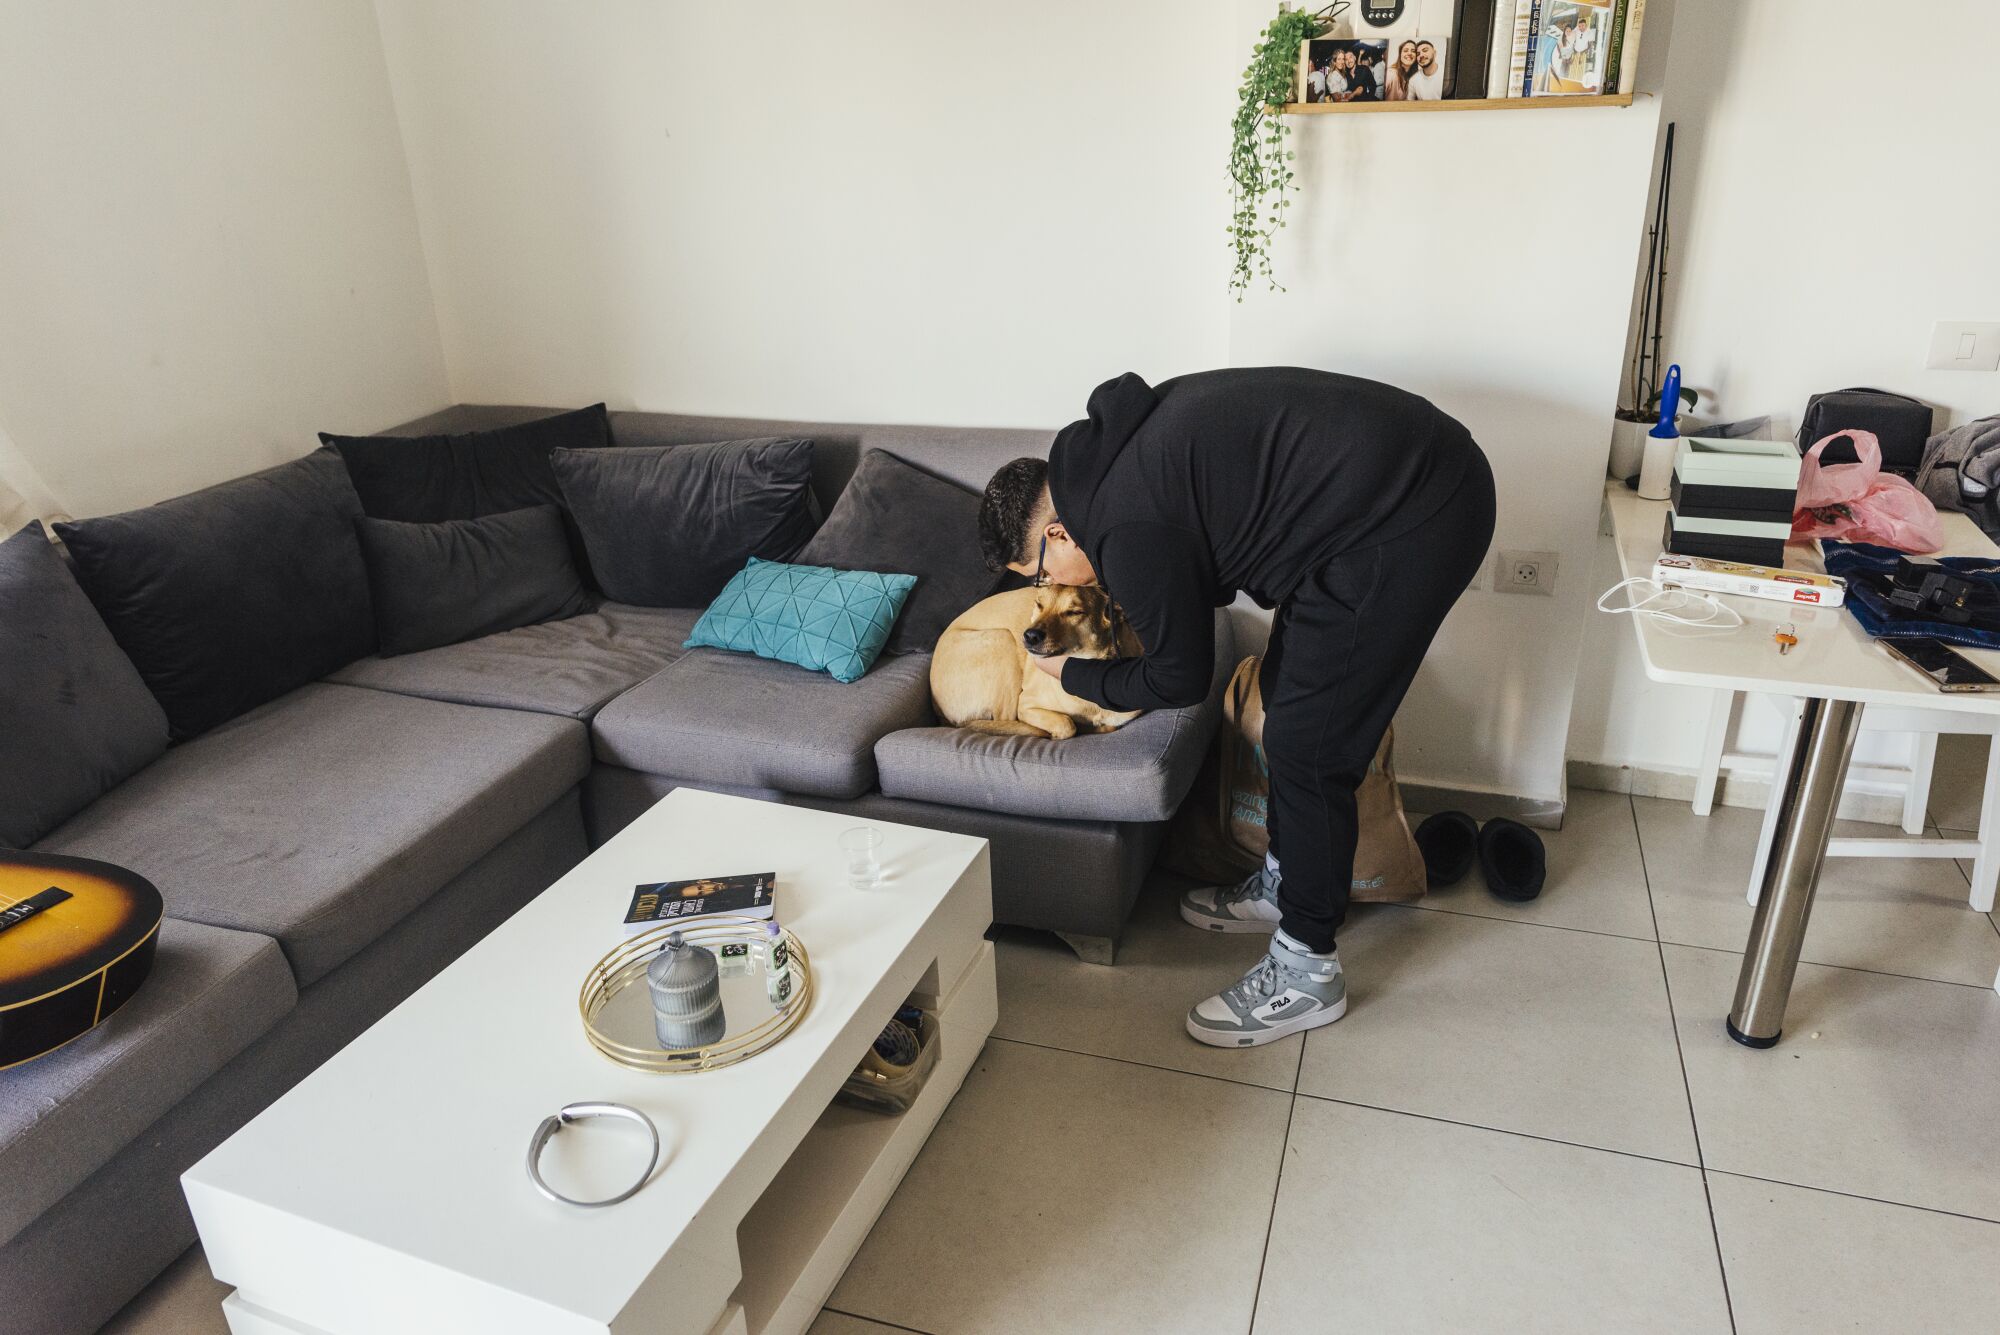 A man with dark hair, wearing dark clothes, bends down to kiss a dog on a couch 